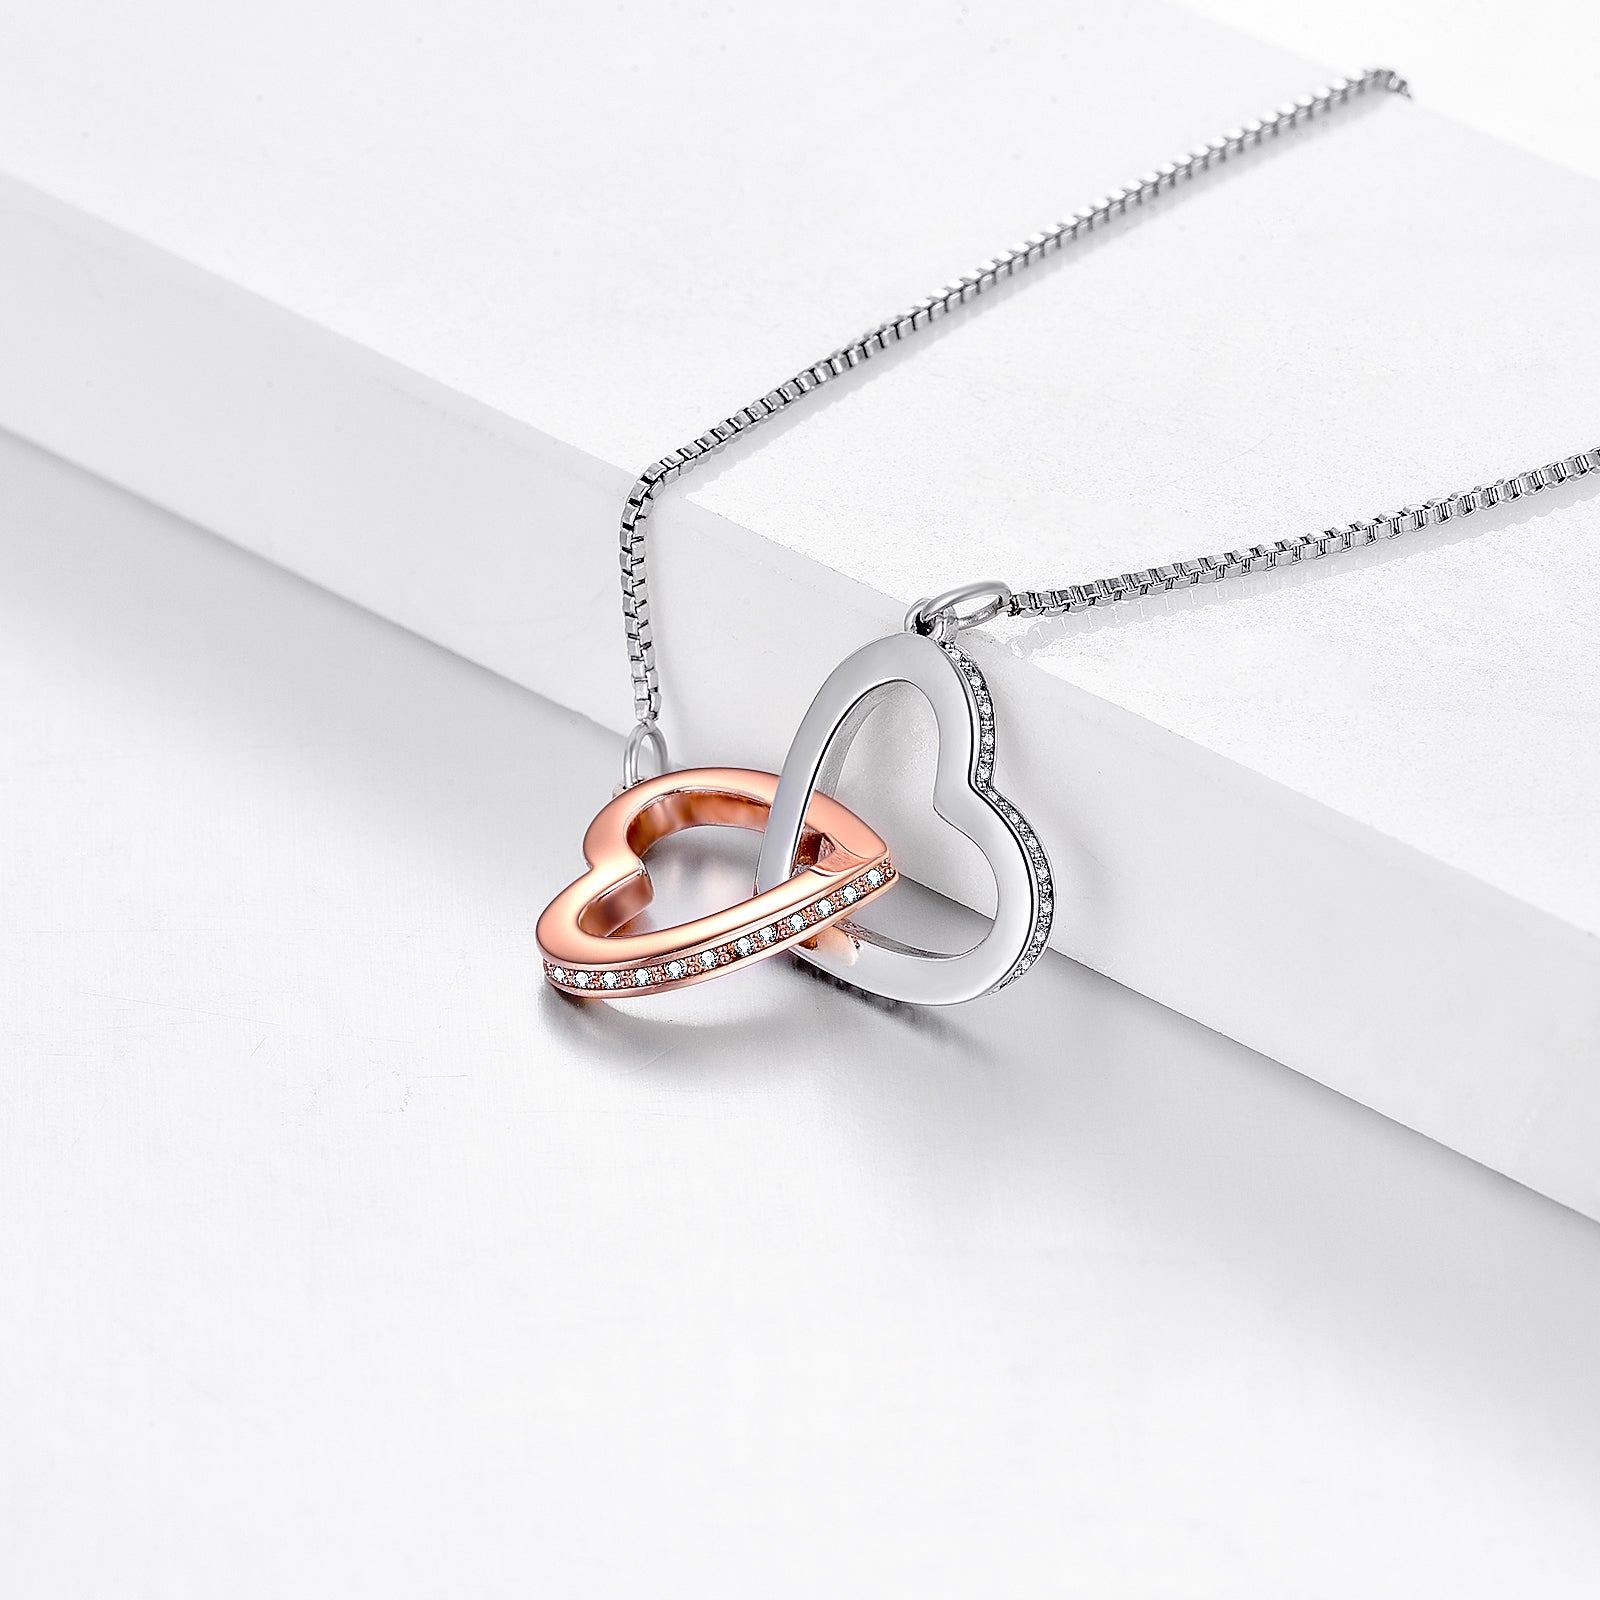 Personalized Necklaces - Grapest Love: Locked Hearts Necklace + Custom Message Display 